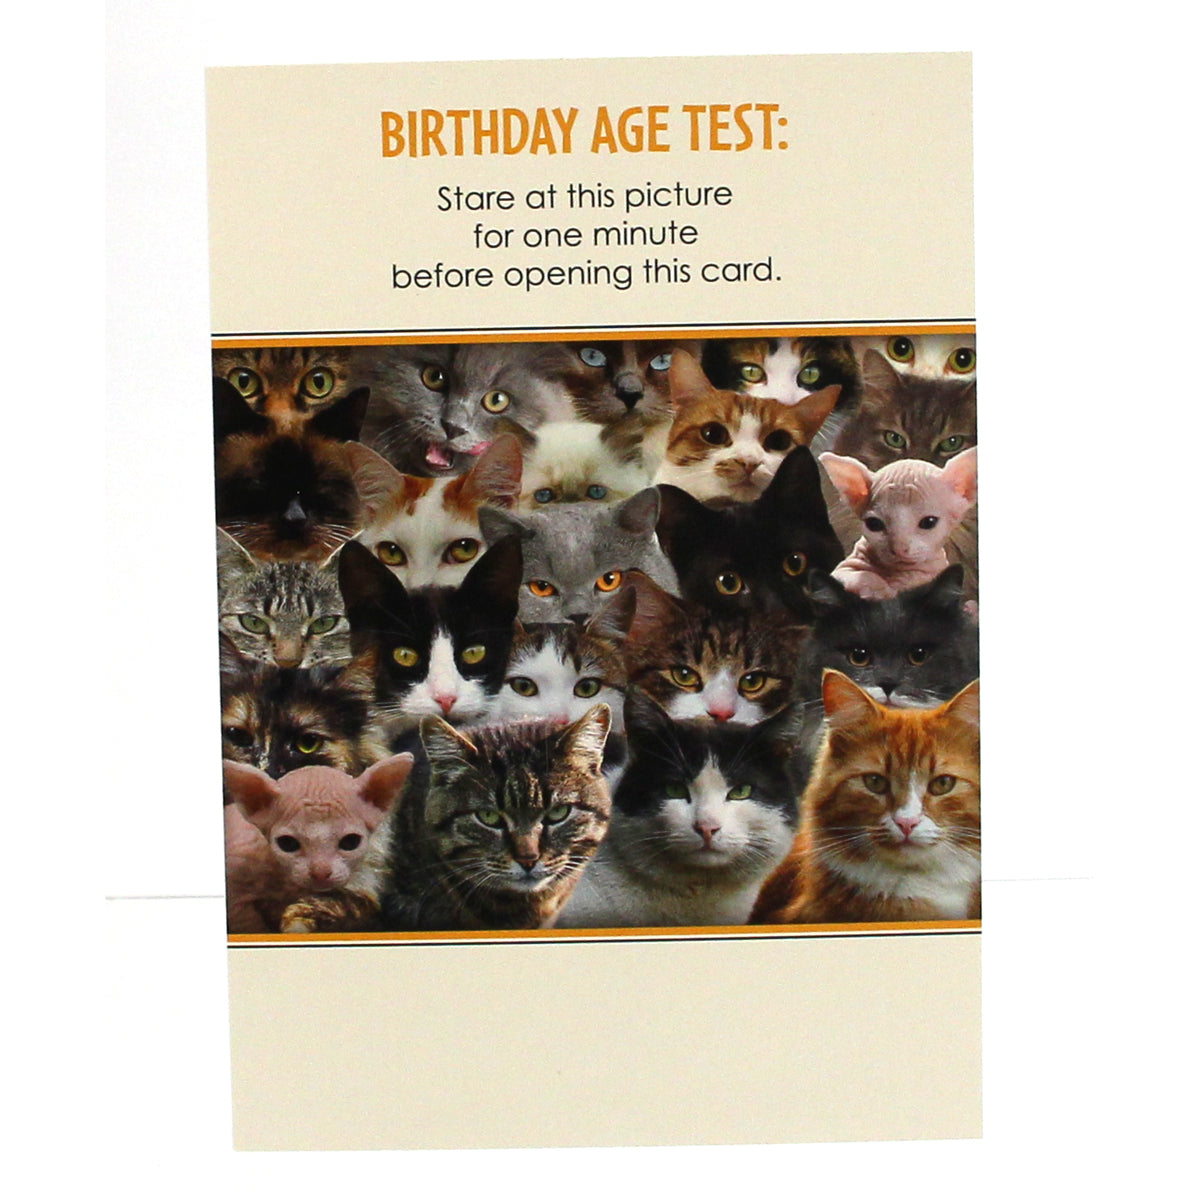 Birthday Card: Birthday Age Test (image of cats)